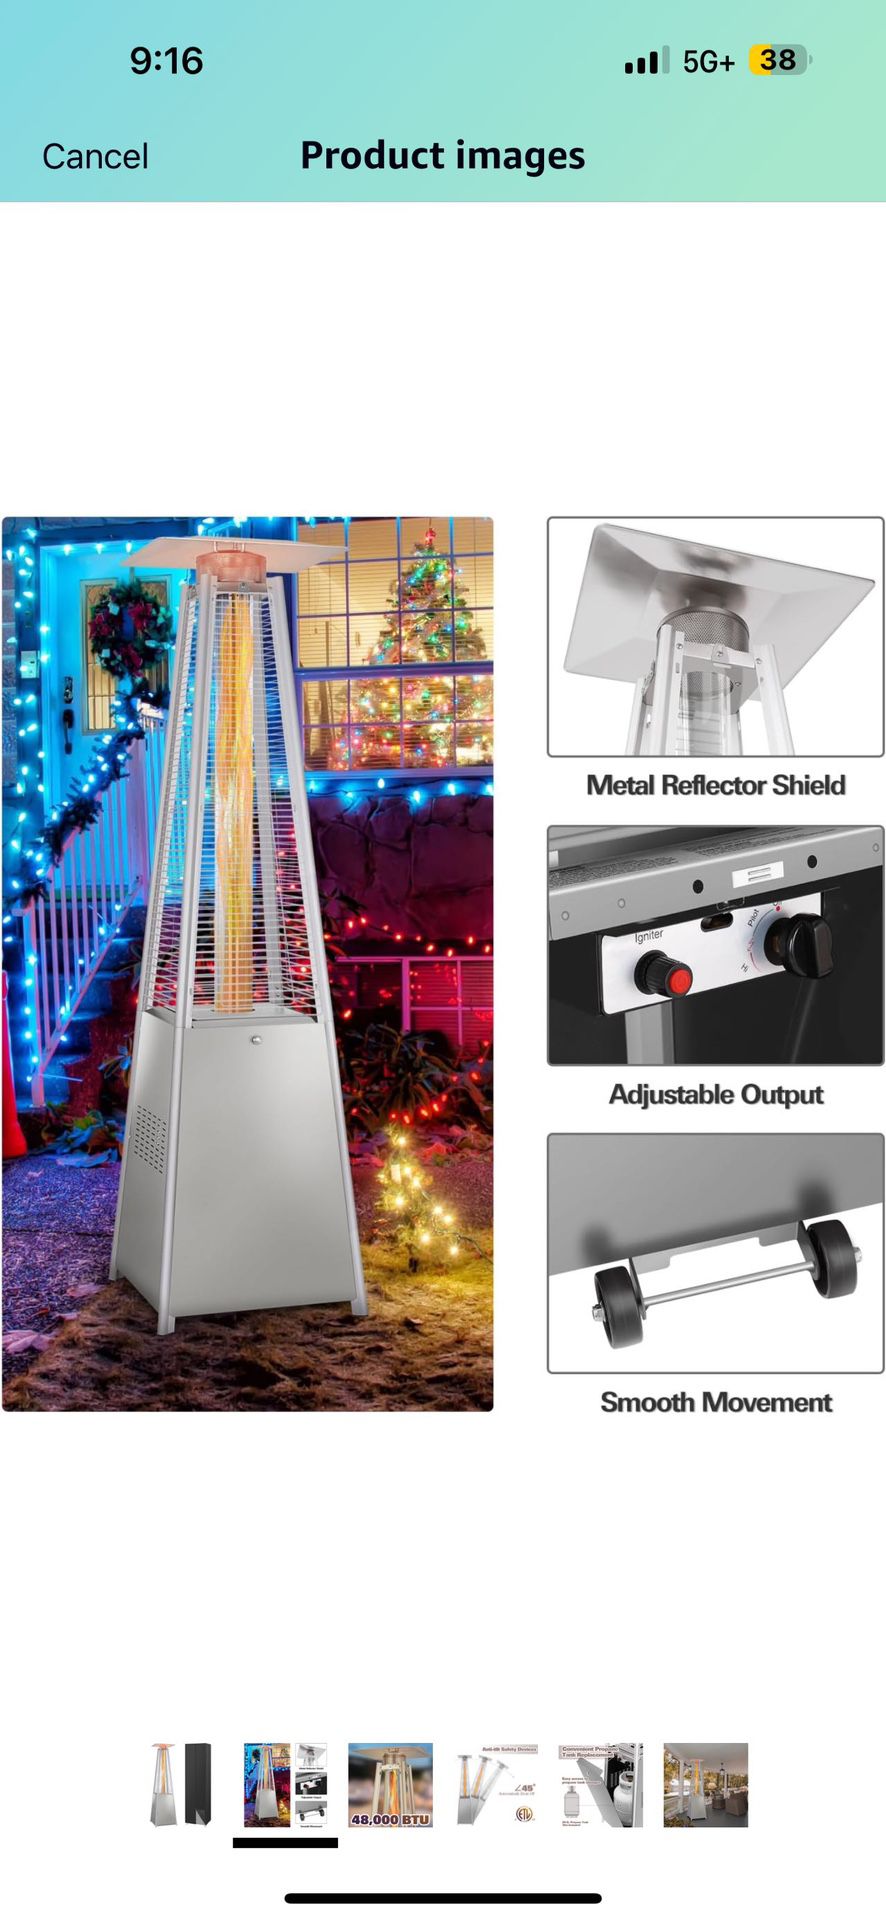 48000 BTU Pyramid Patio Heater, Glass Tube Propane Patio Heater with Wheels and Cover, Outdoor Propane Heaters for Backyard, Garden, Patio, Porch and 